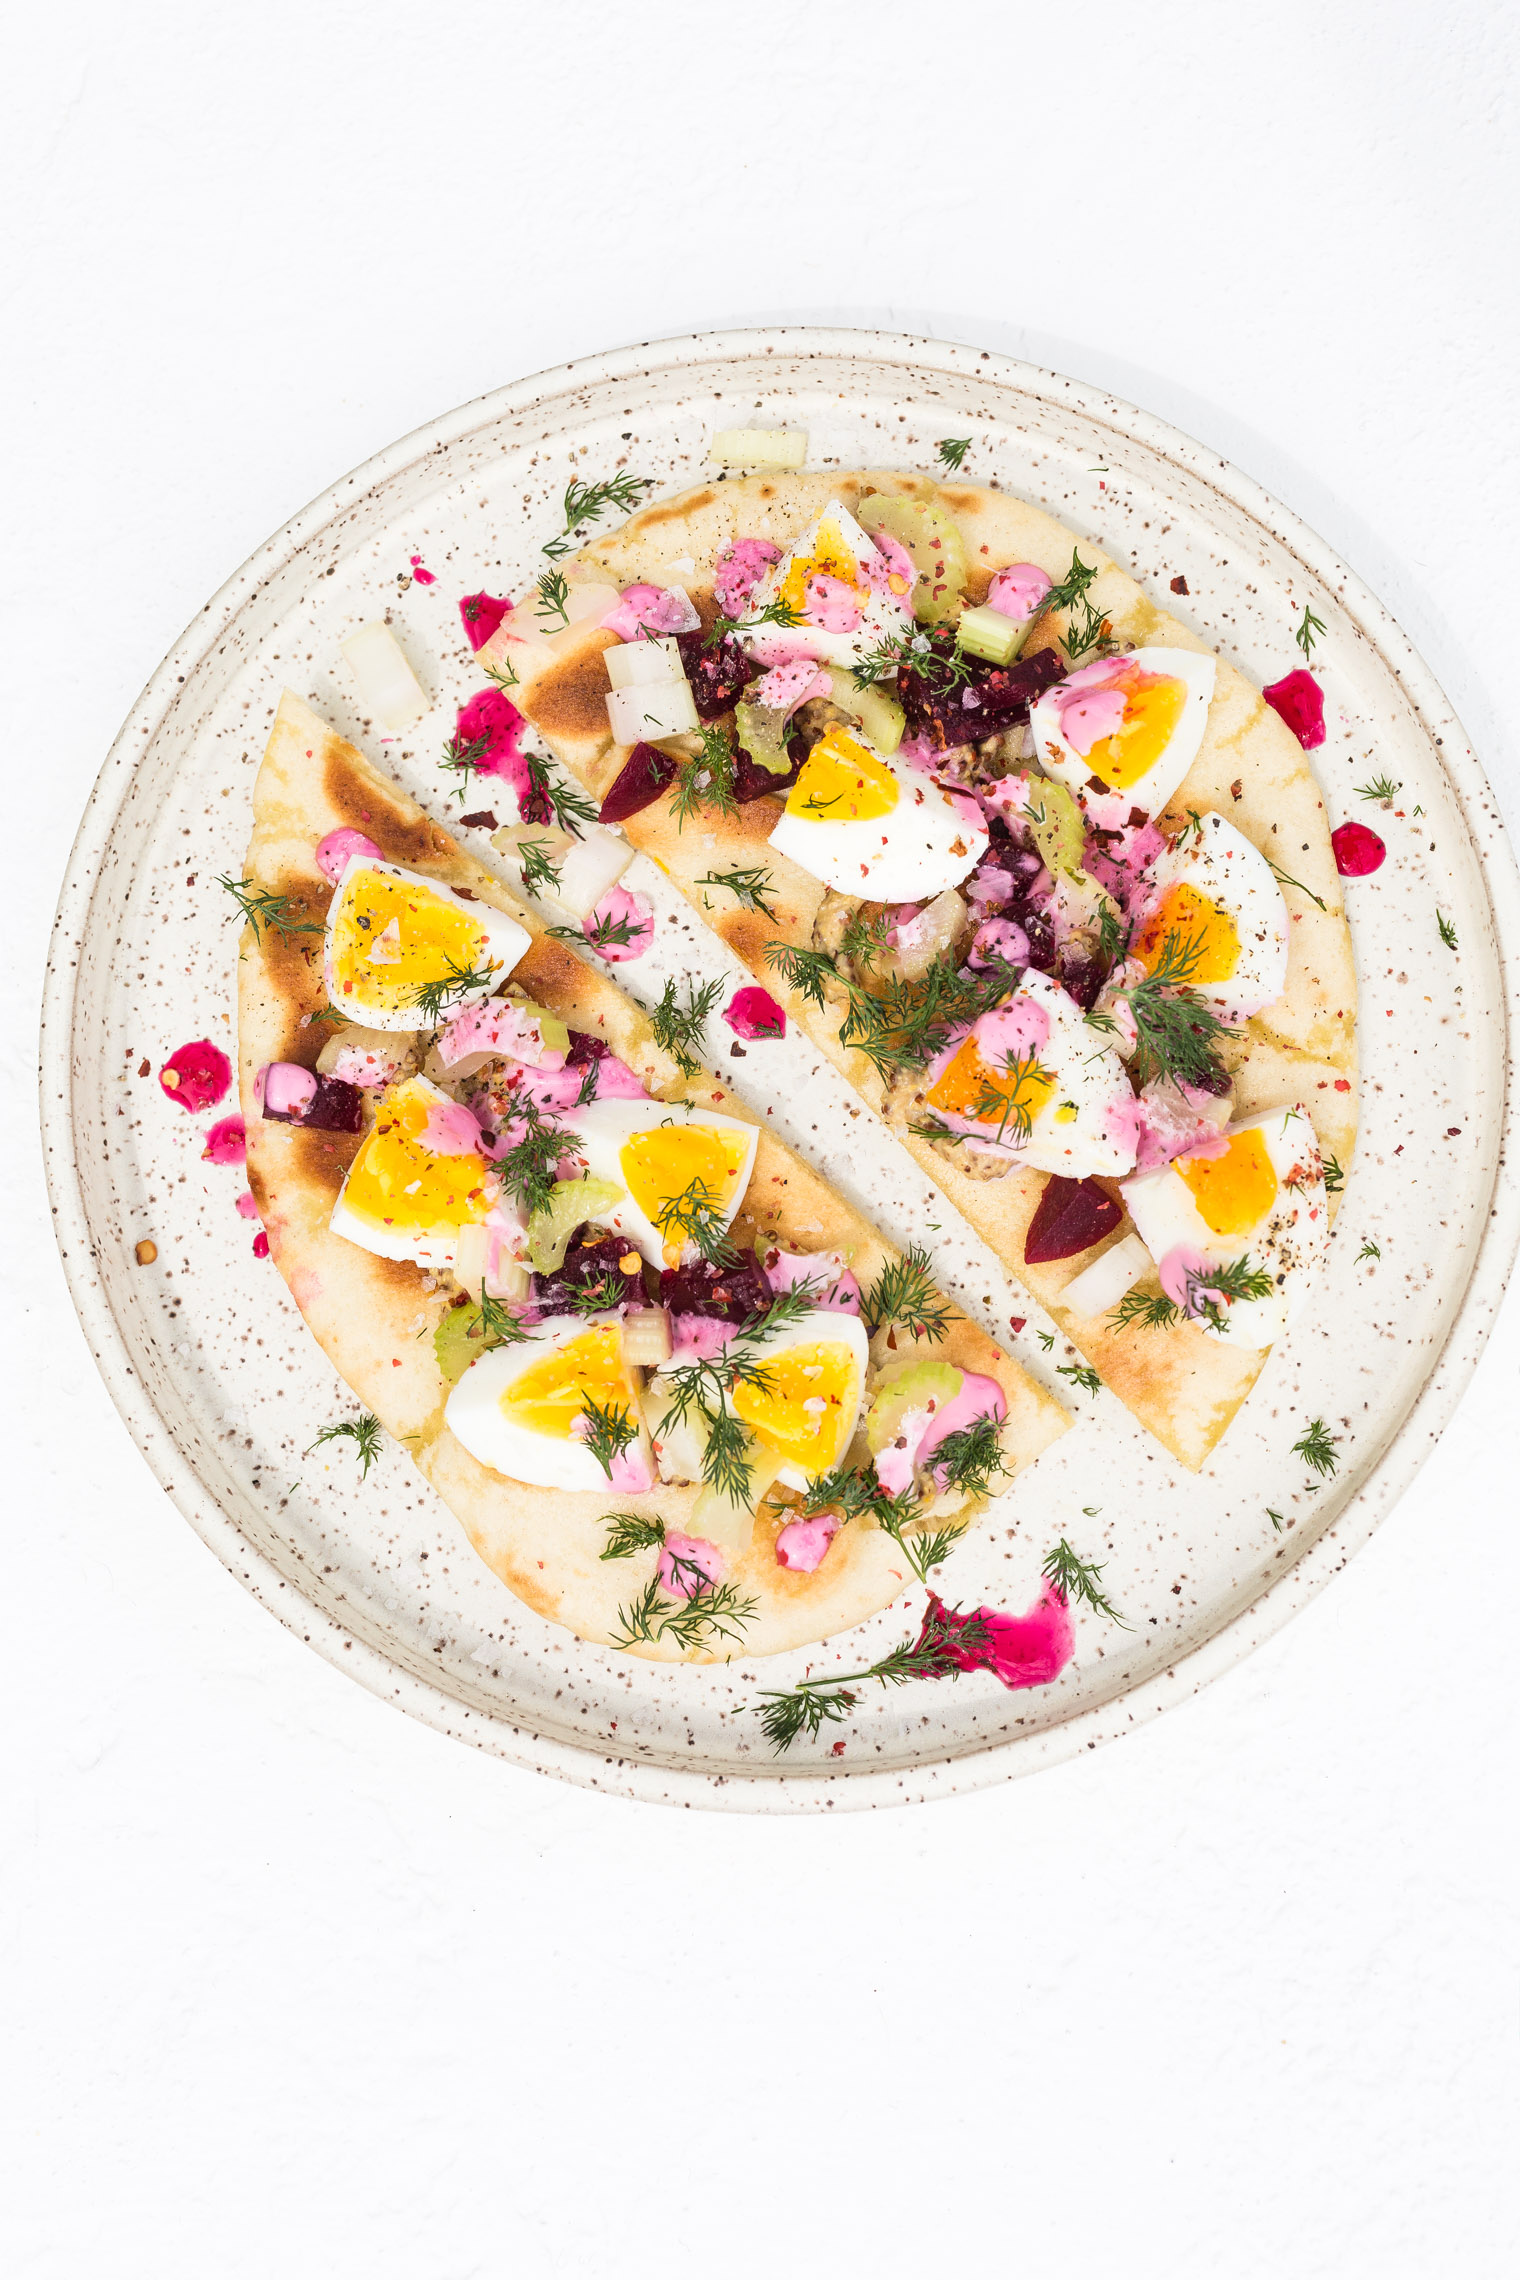 Egg Salad Recipe with Pink Mayo and Pickled Beets for One